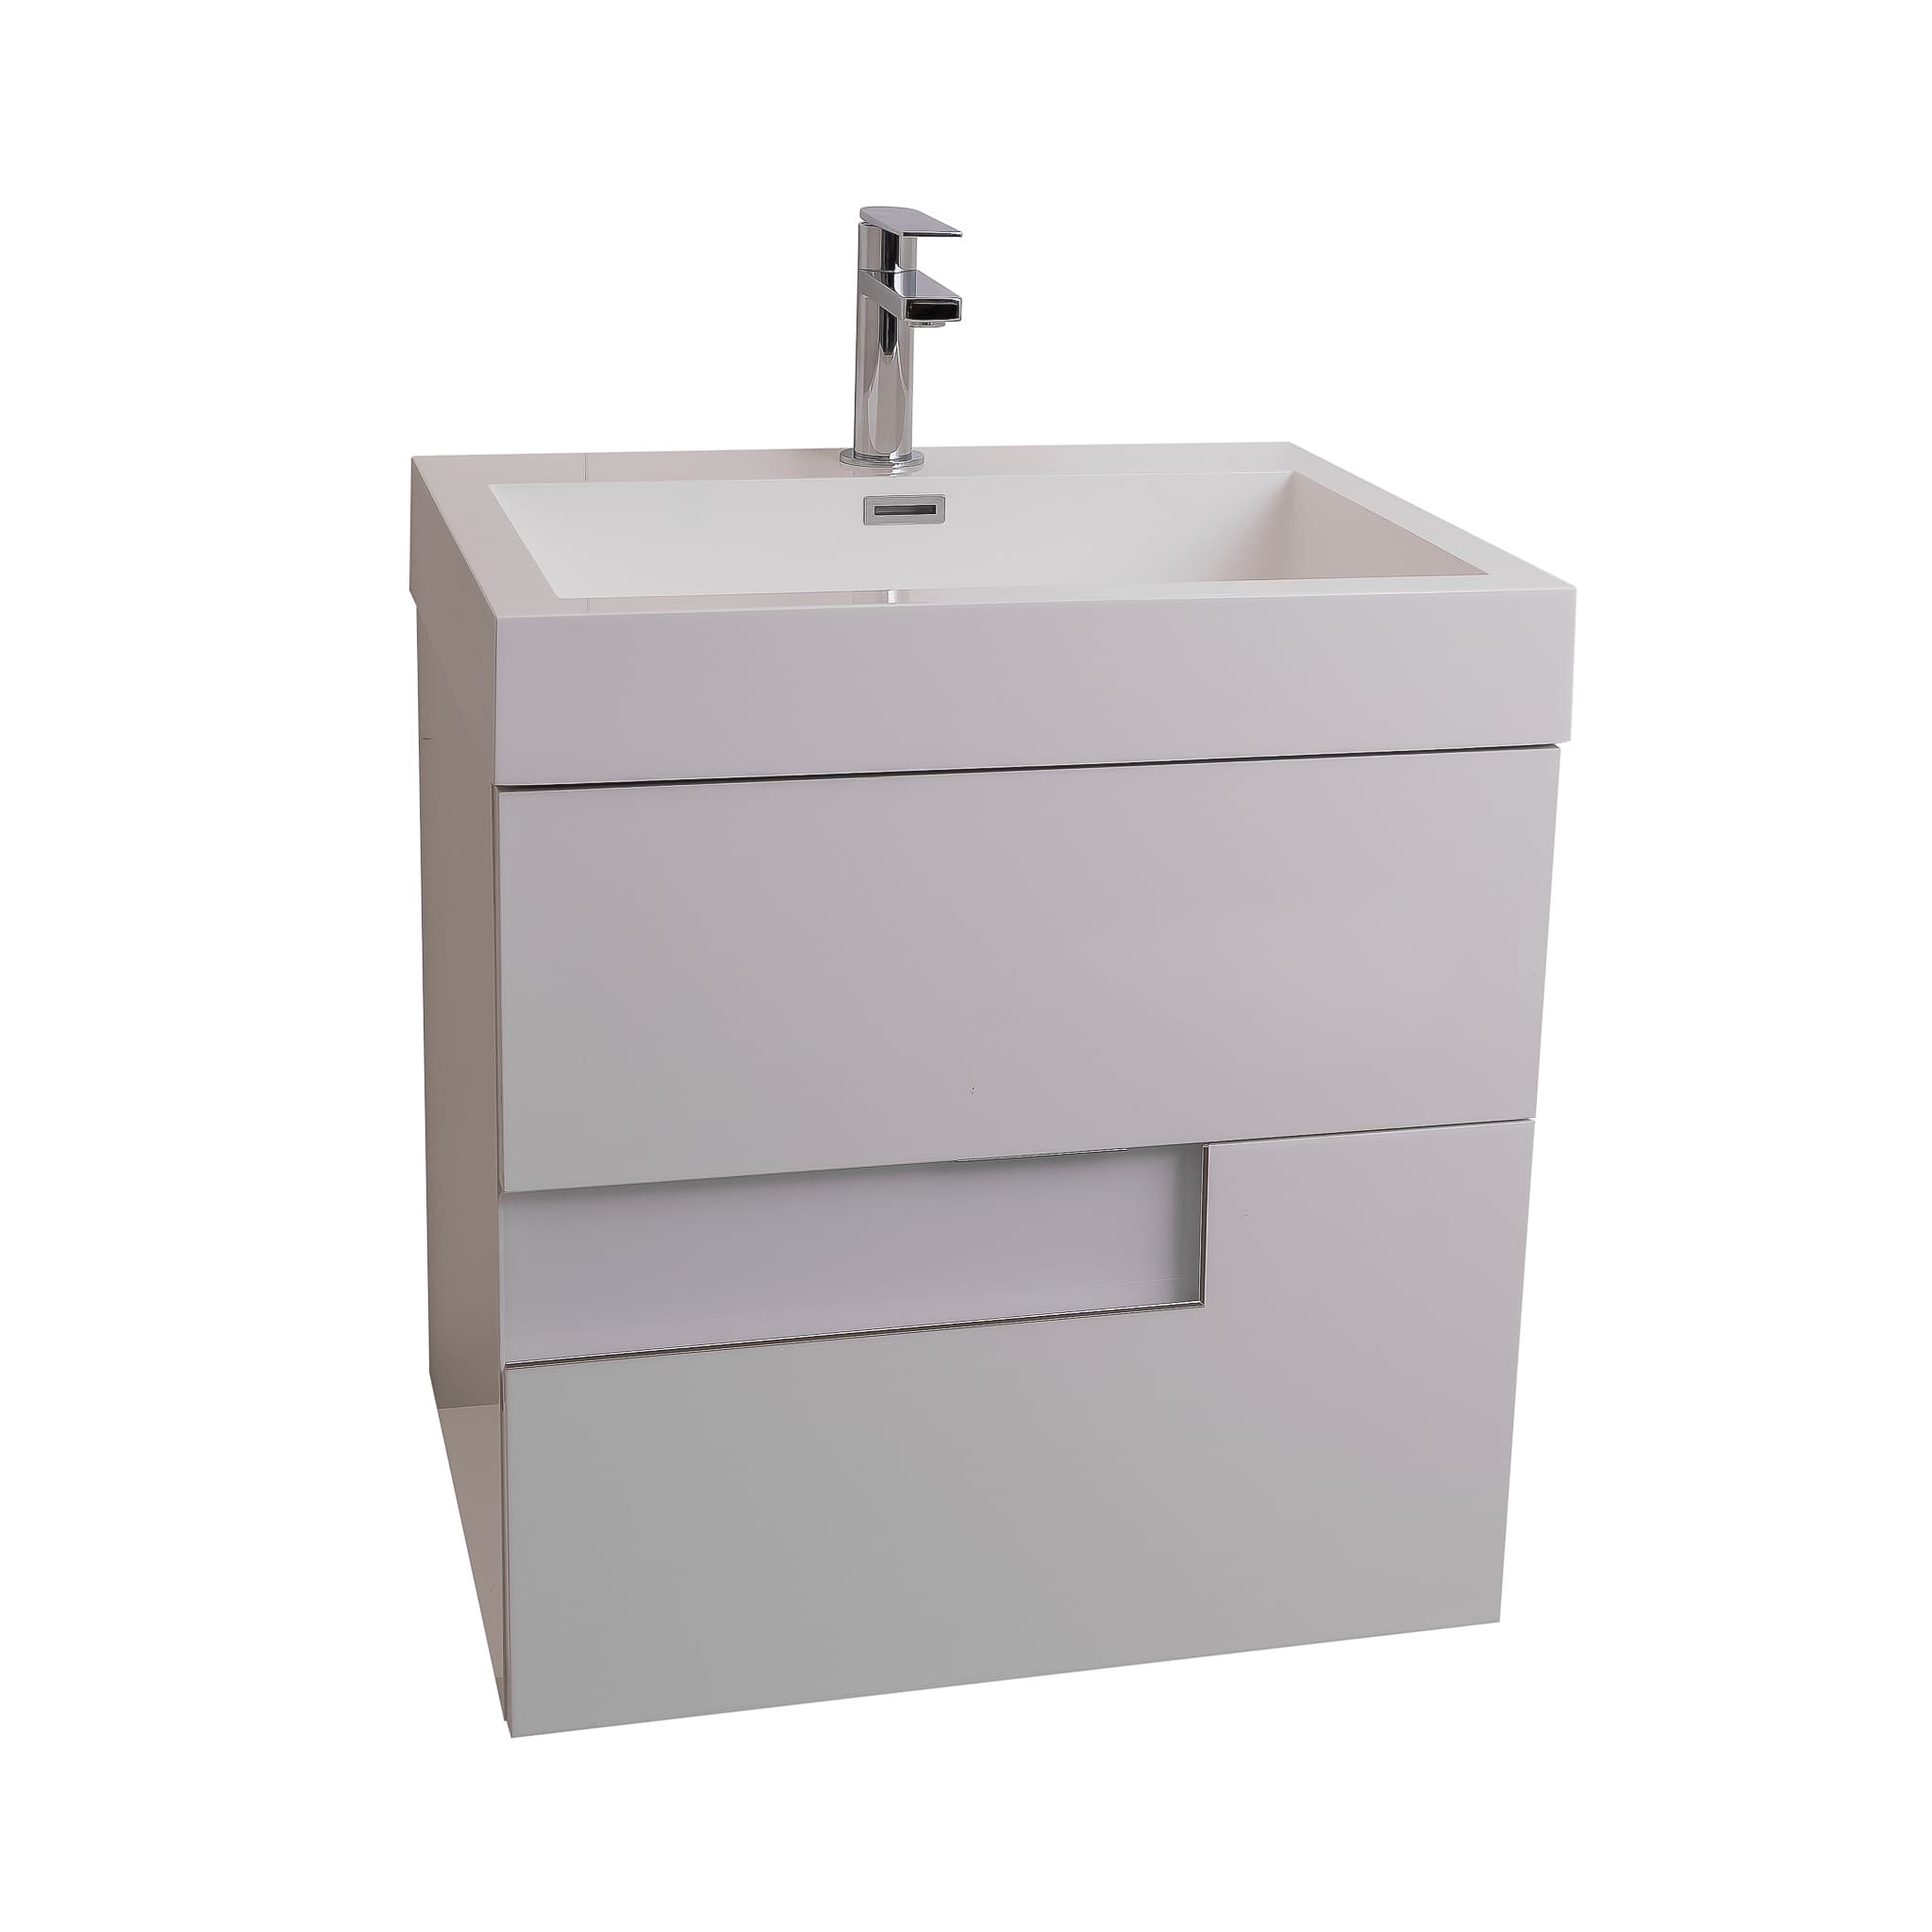 Vision 23.5 White High Gloss Cabinet, Square Cultured Marble Sink, Wall Mounted Modern Vanity Set